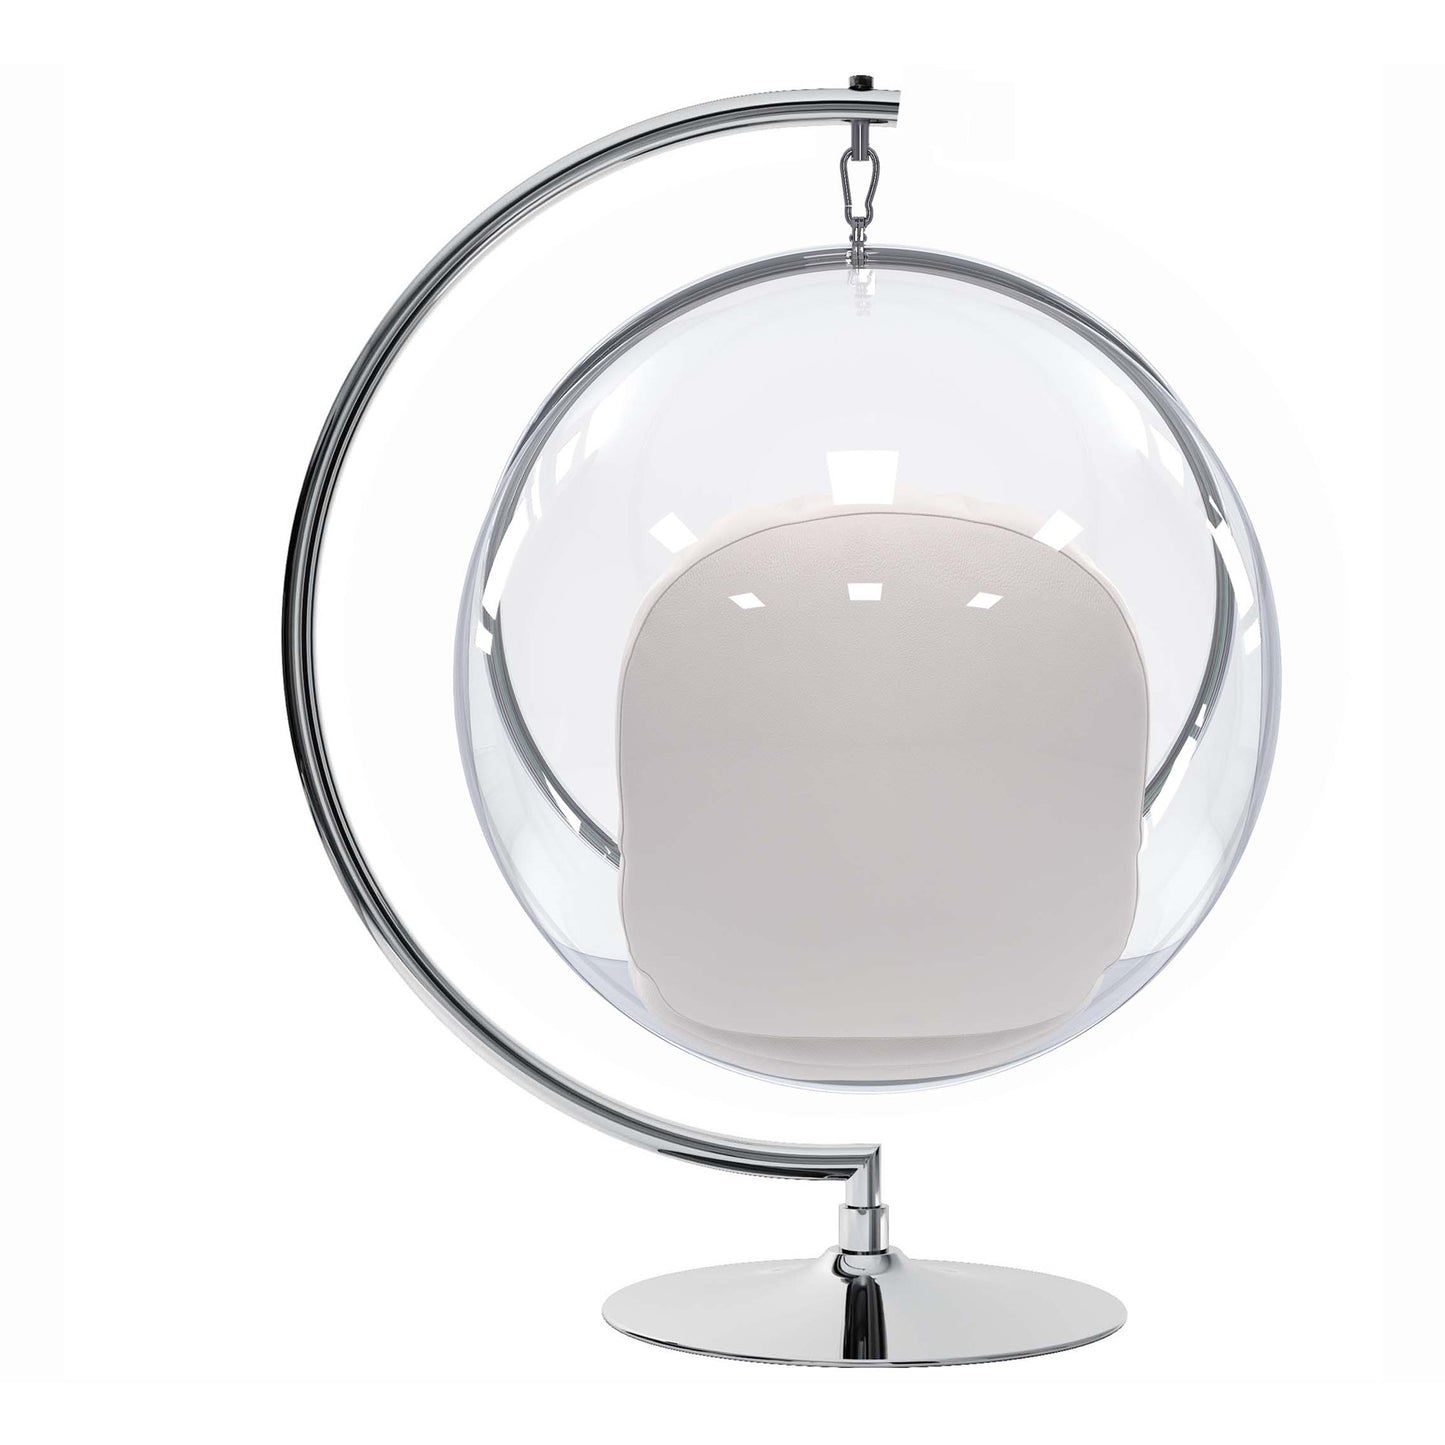 Hanging Bubble Chair With Stand, White Cushions